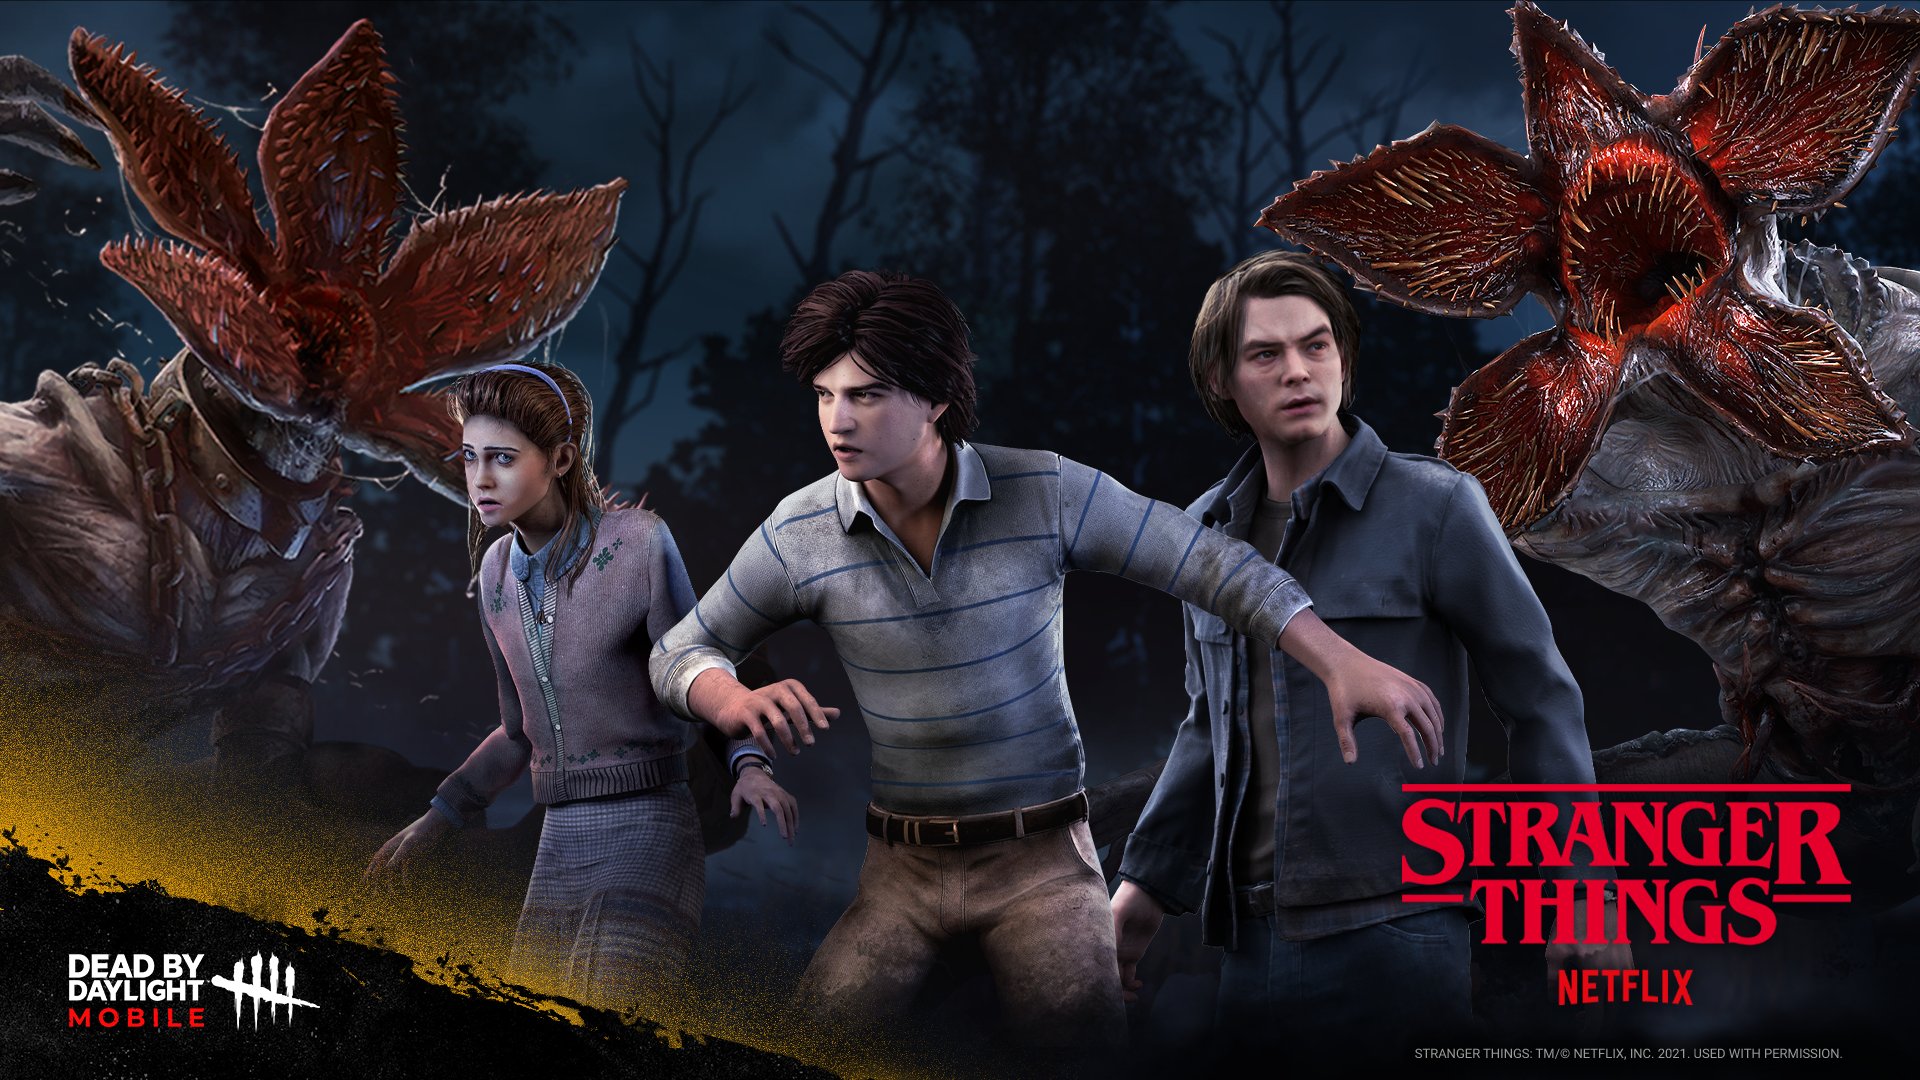 Dead by Daylight Mobile, Steve, and The Demogorgon are leaving the Dead by Daylight Mobile store in November, but we're not ready to say goodbye just yet. Take part